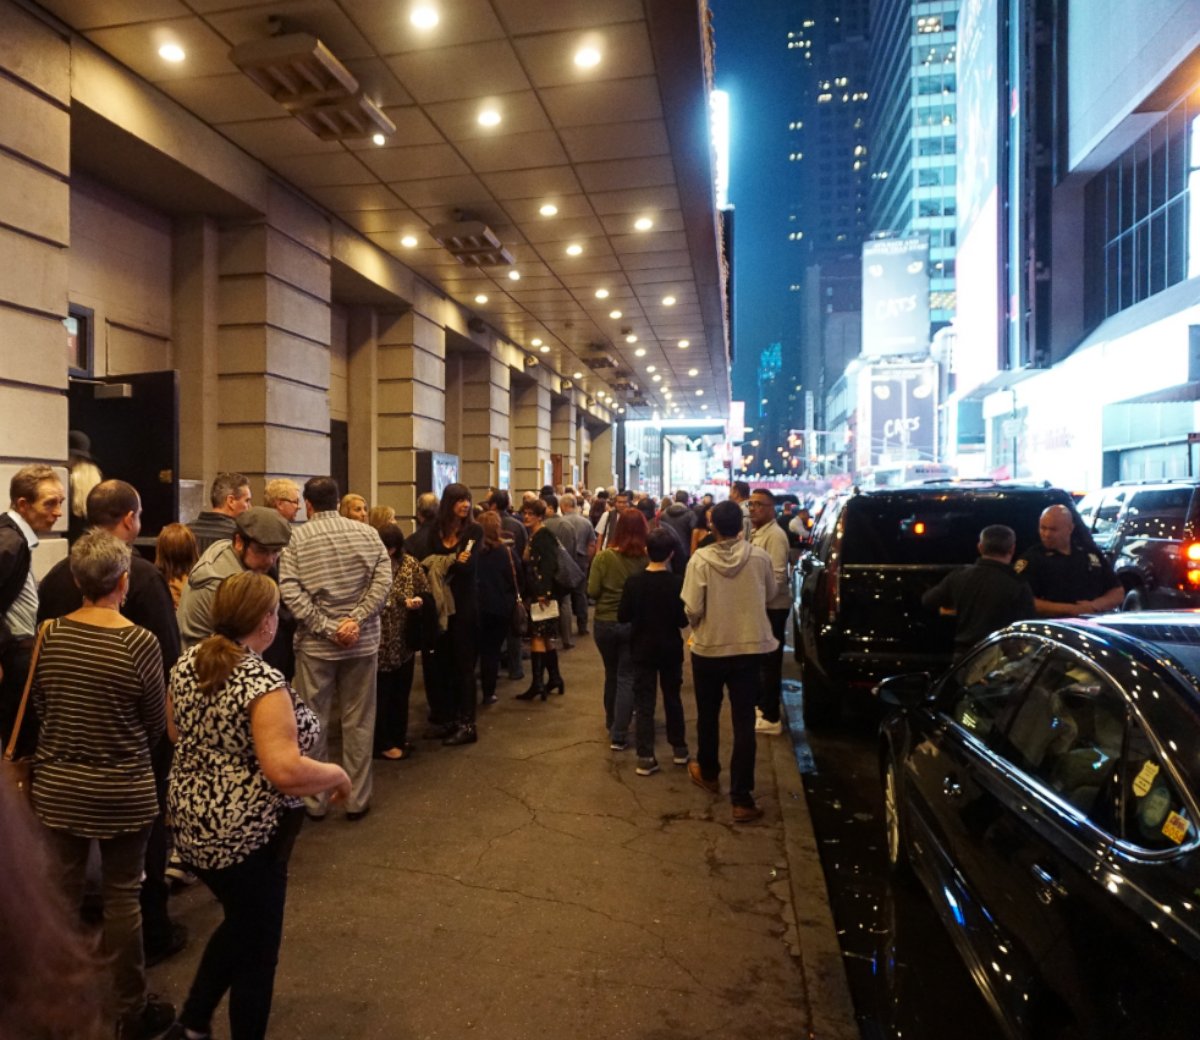 PHOTO: Theatergoers outside the Lunt-Fontanne Theatre in New York, Oct. 21, 2016.